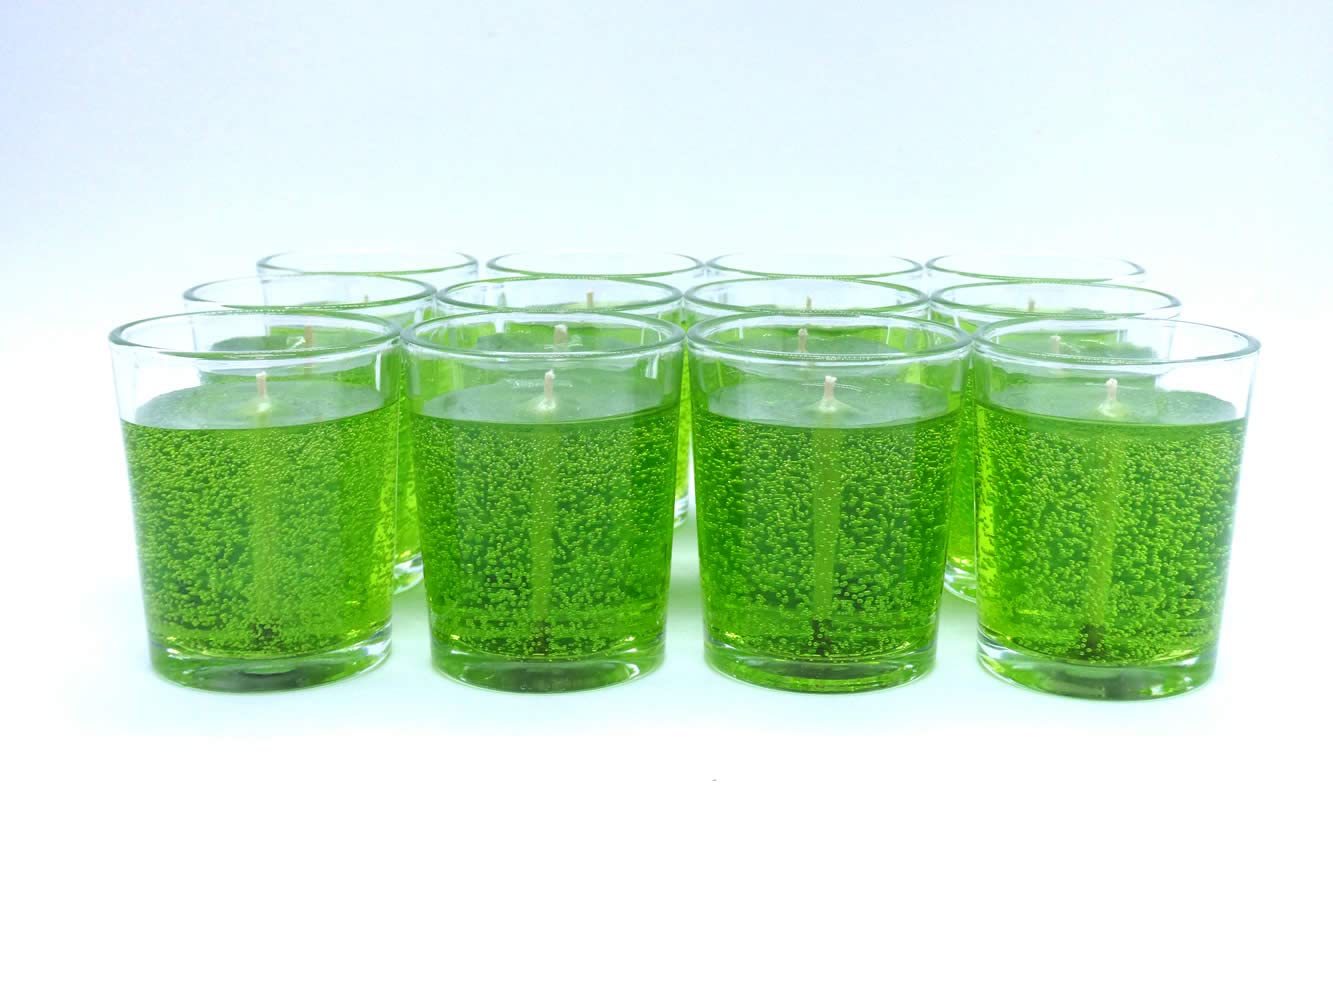 12 Lime Green Color Unscented Mineral Oil Based Candle Votives up to 25 Hour Eac - $43.60